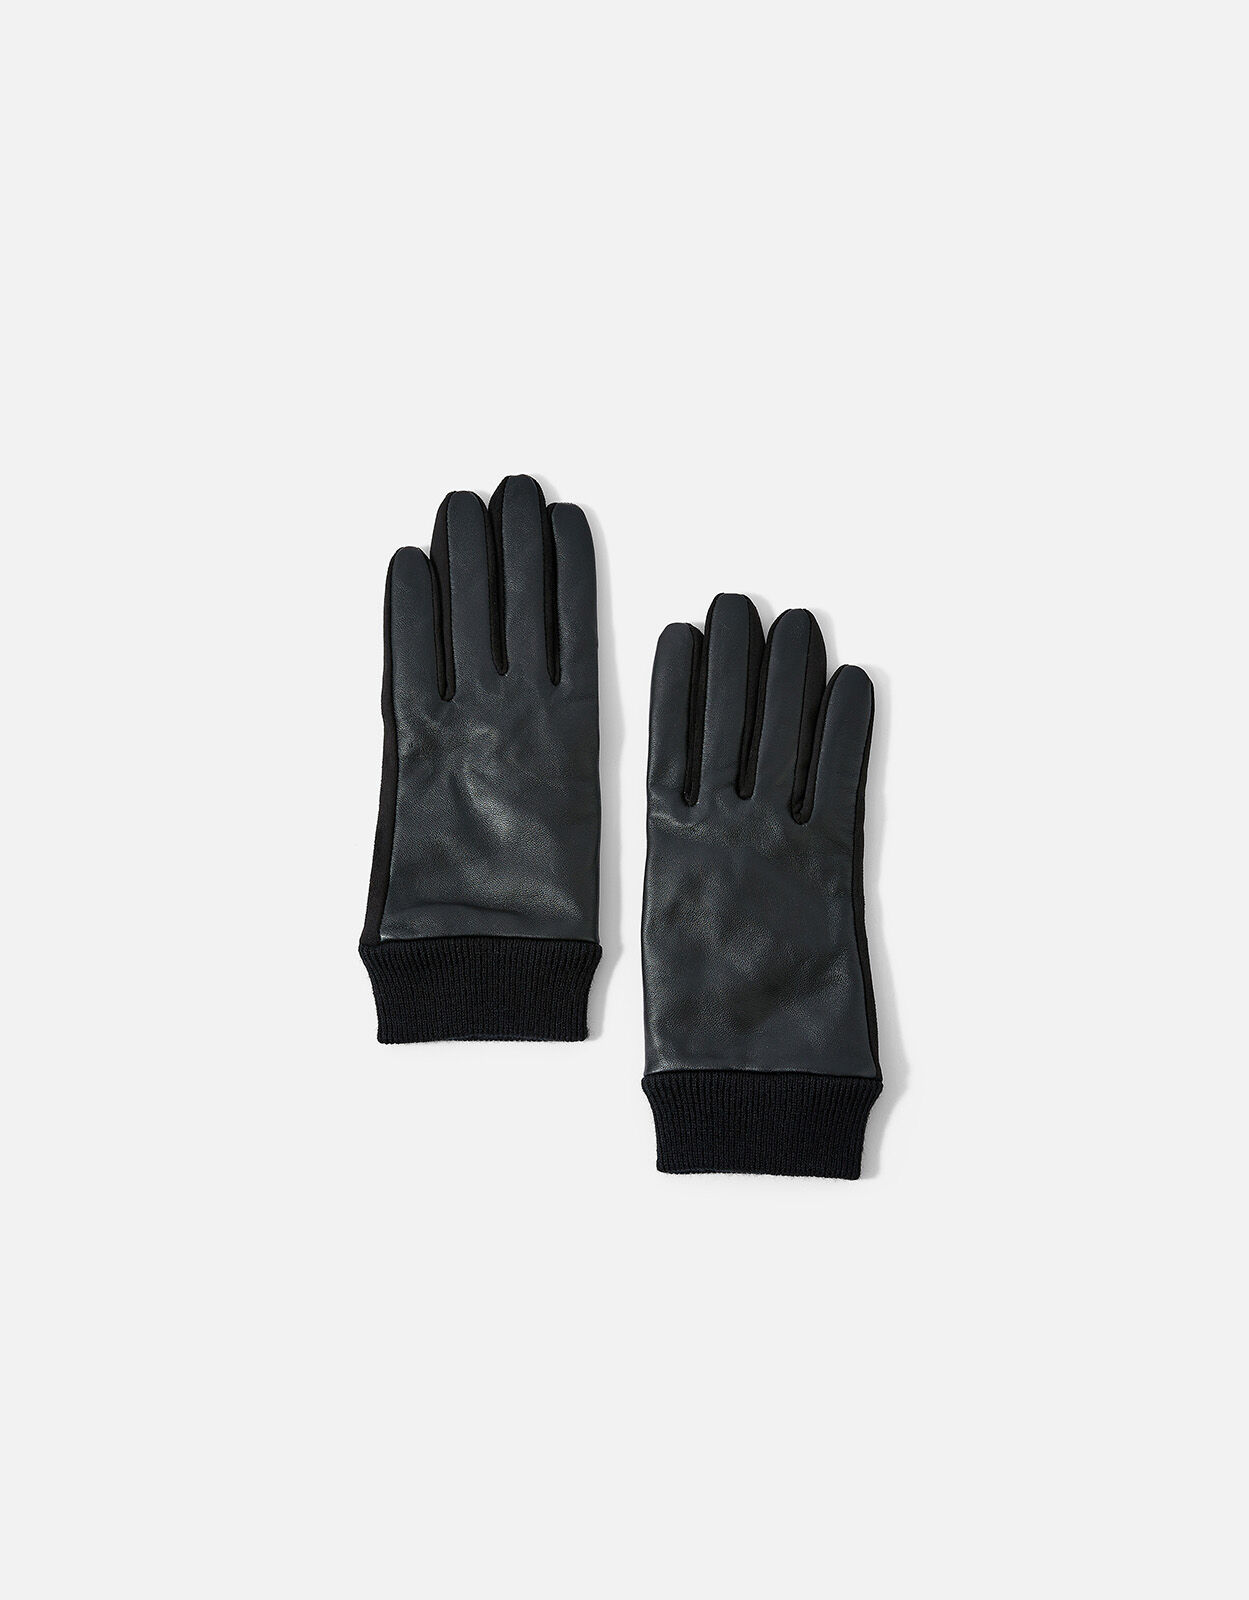 Woman's Size 7 Made in Italy  Black Kid Leather Unlined Gloves with Gold Plated Black Enamel Insert Appliques Accessoires Handschoenen & wanten Rijhandschoenen Black Leather Driving Glove 